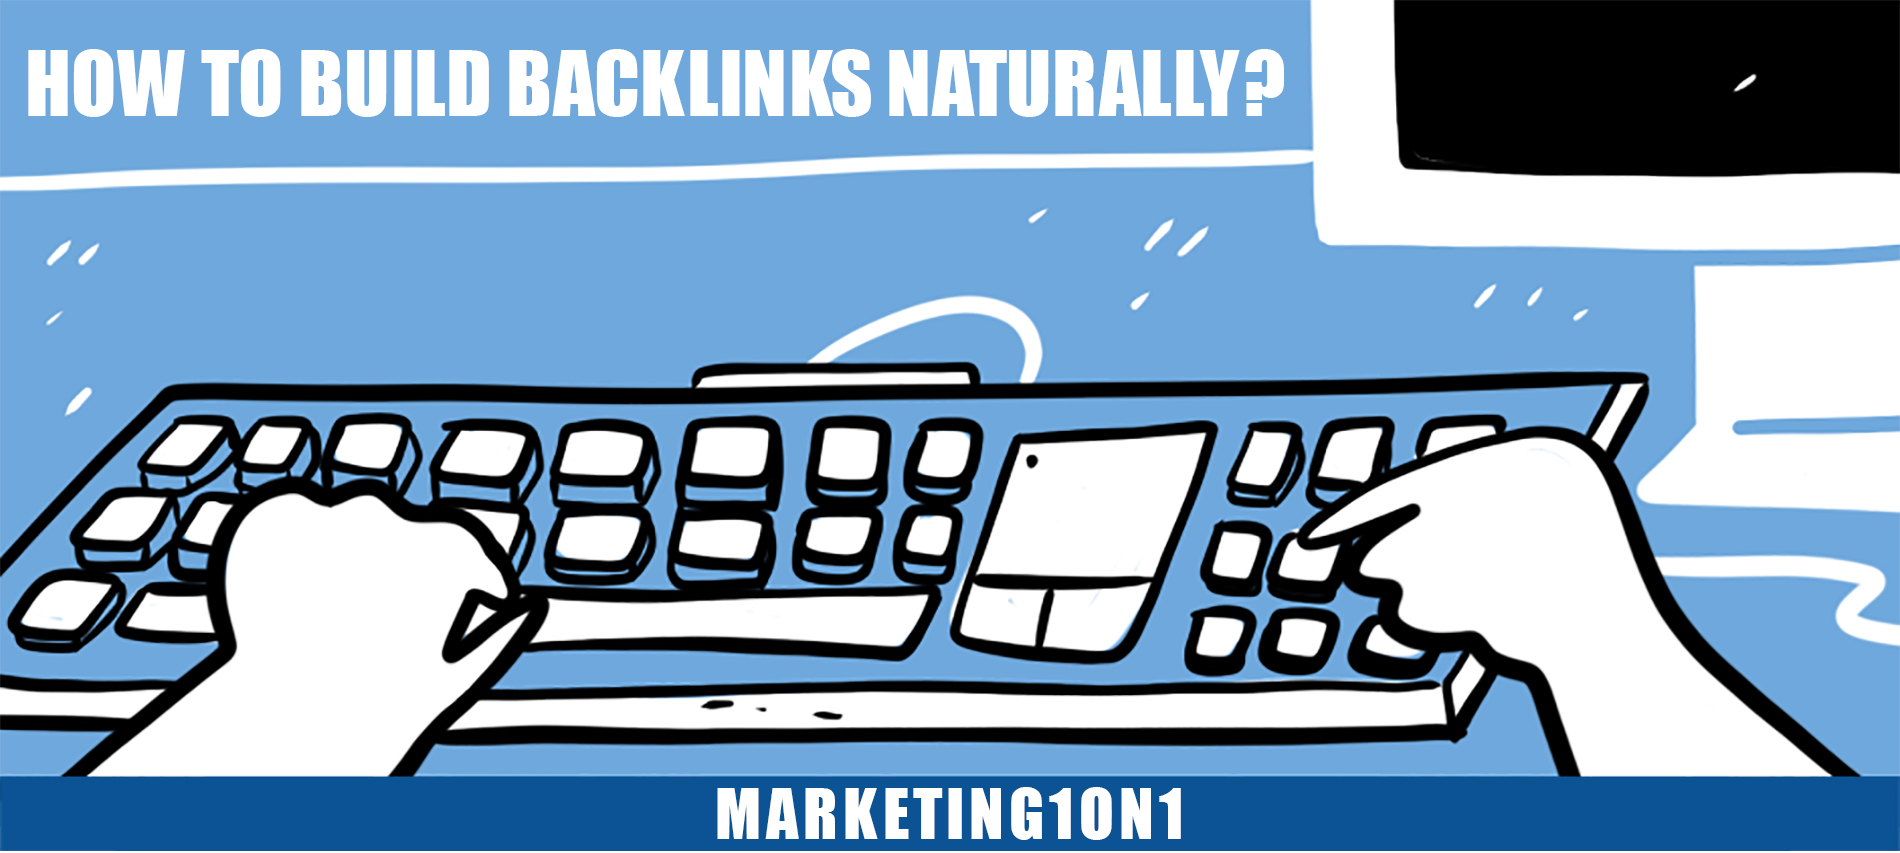 How to build backlinks naturally?